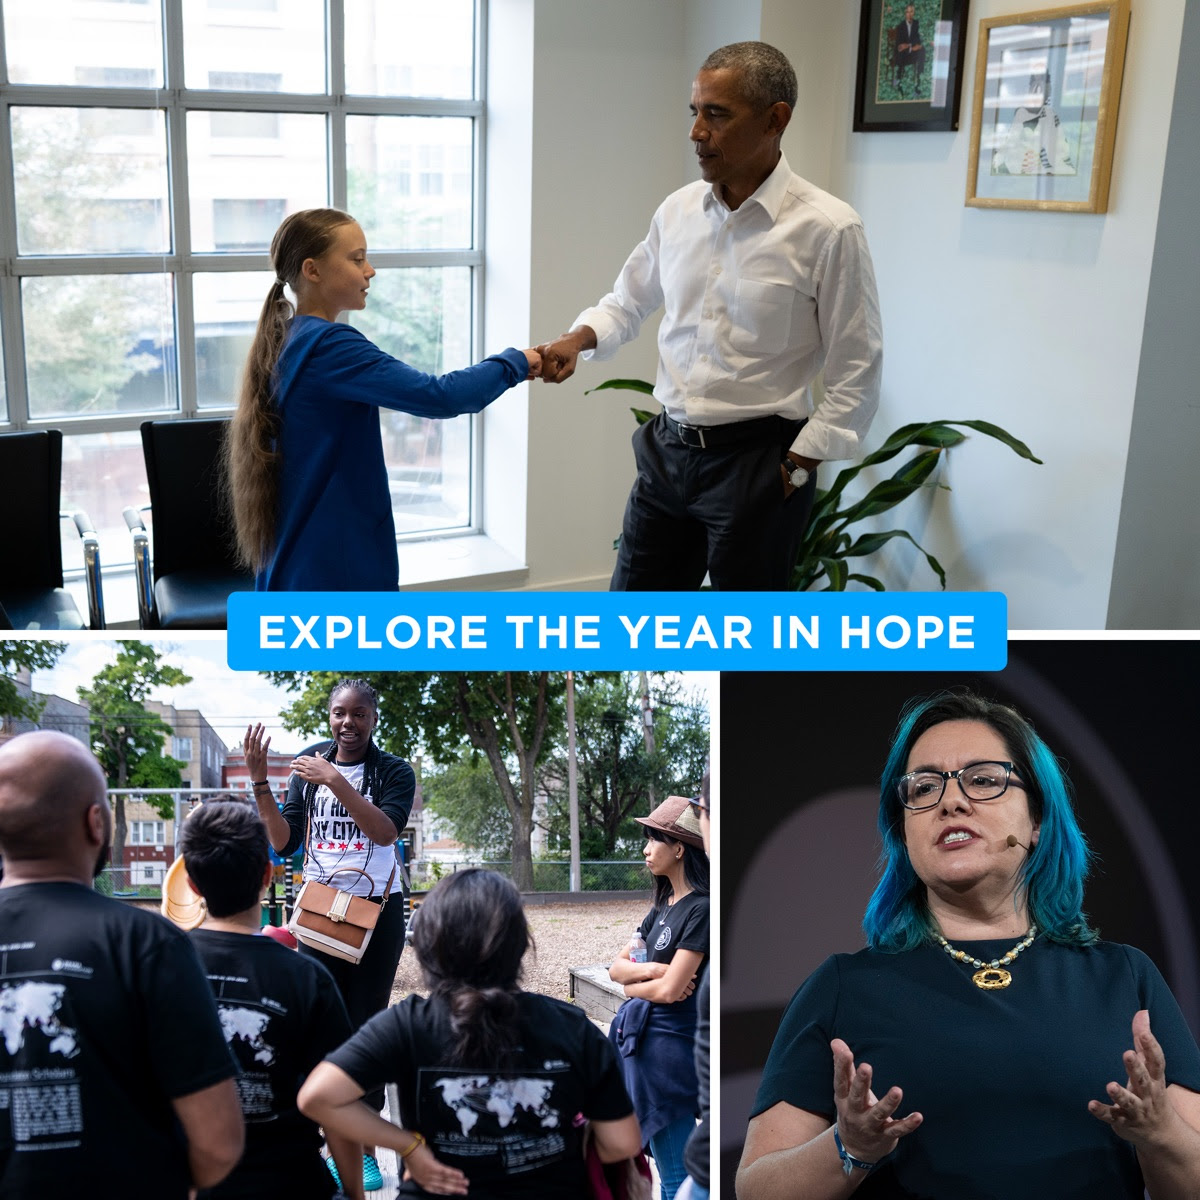 A collage of 3 photos with the text "EXPLORE THE YEAR IN HOPE" overlaid